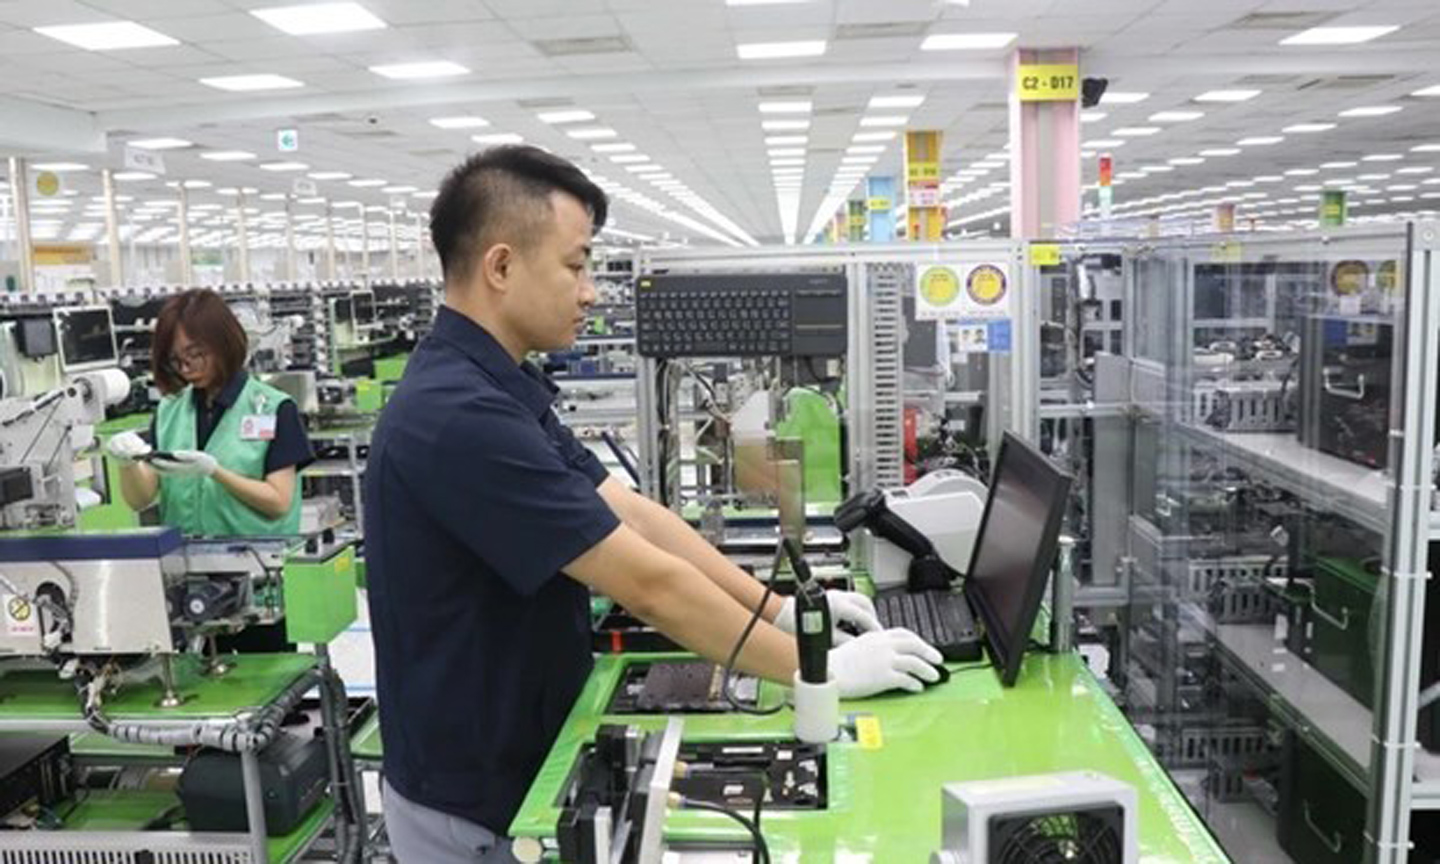 Vietnam wants to cooperate with Samsung in semiconductor development: official